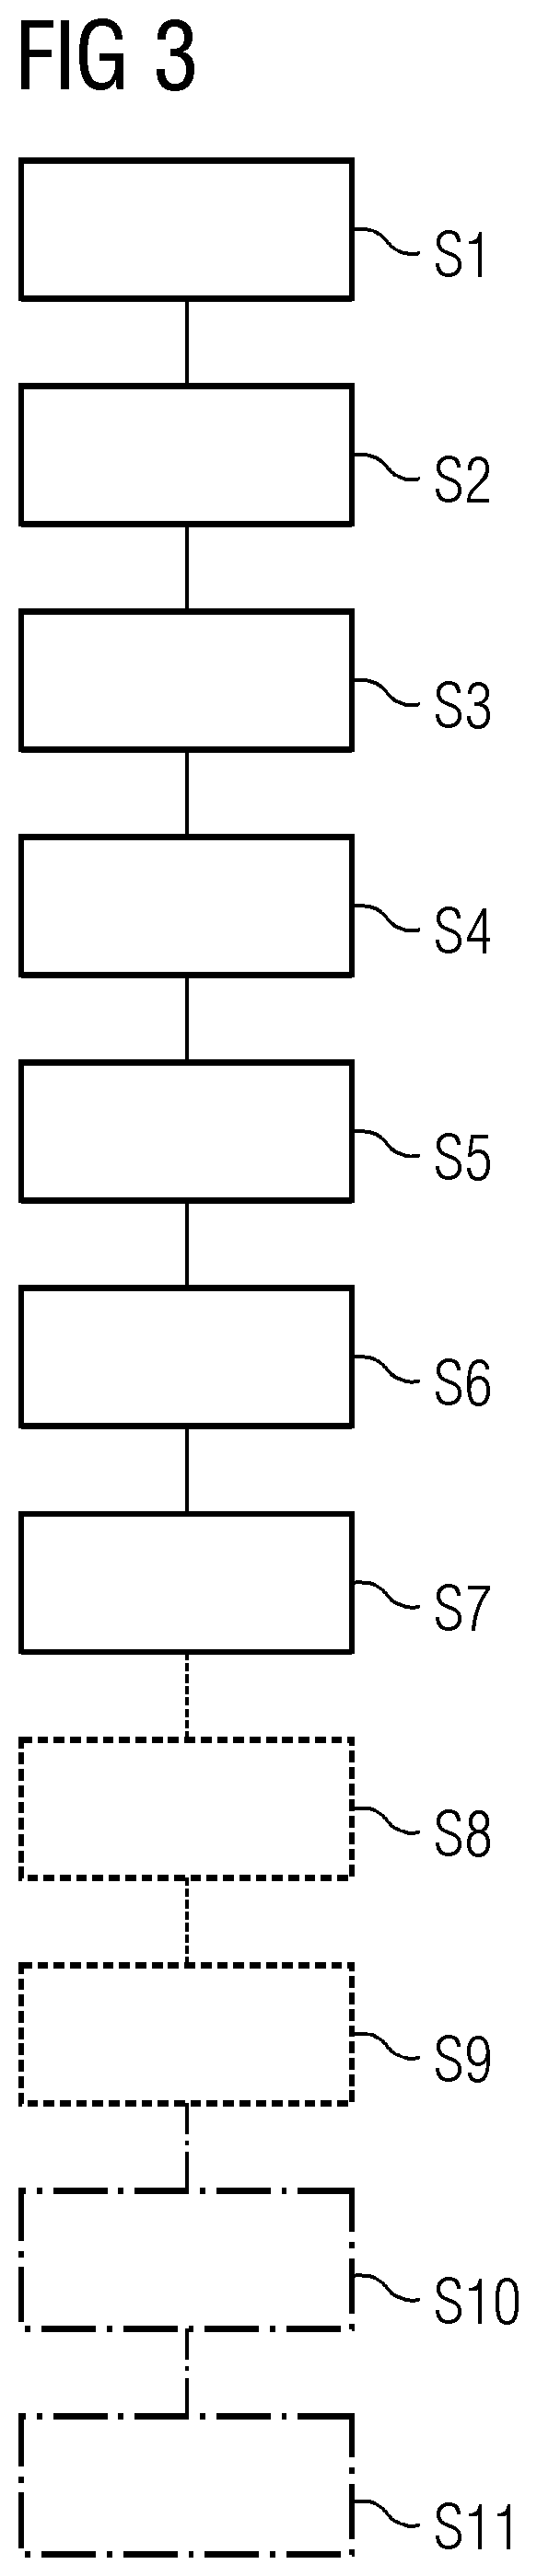 Method for operating a network-aware container orchestration system